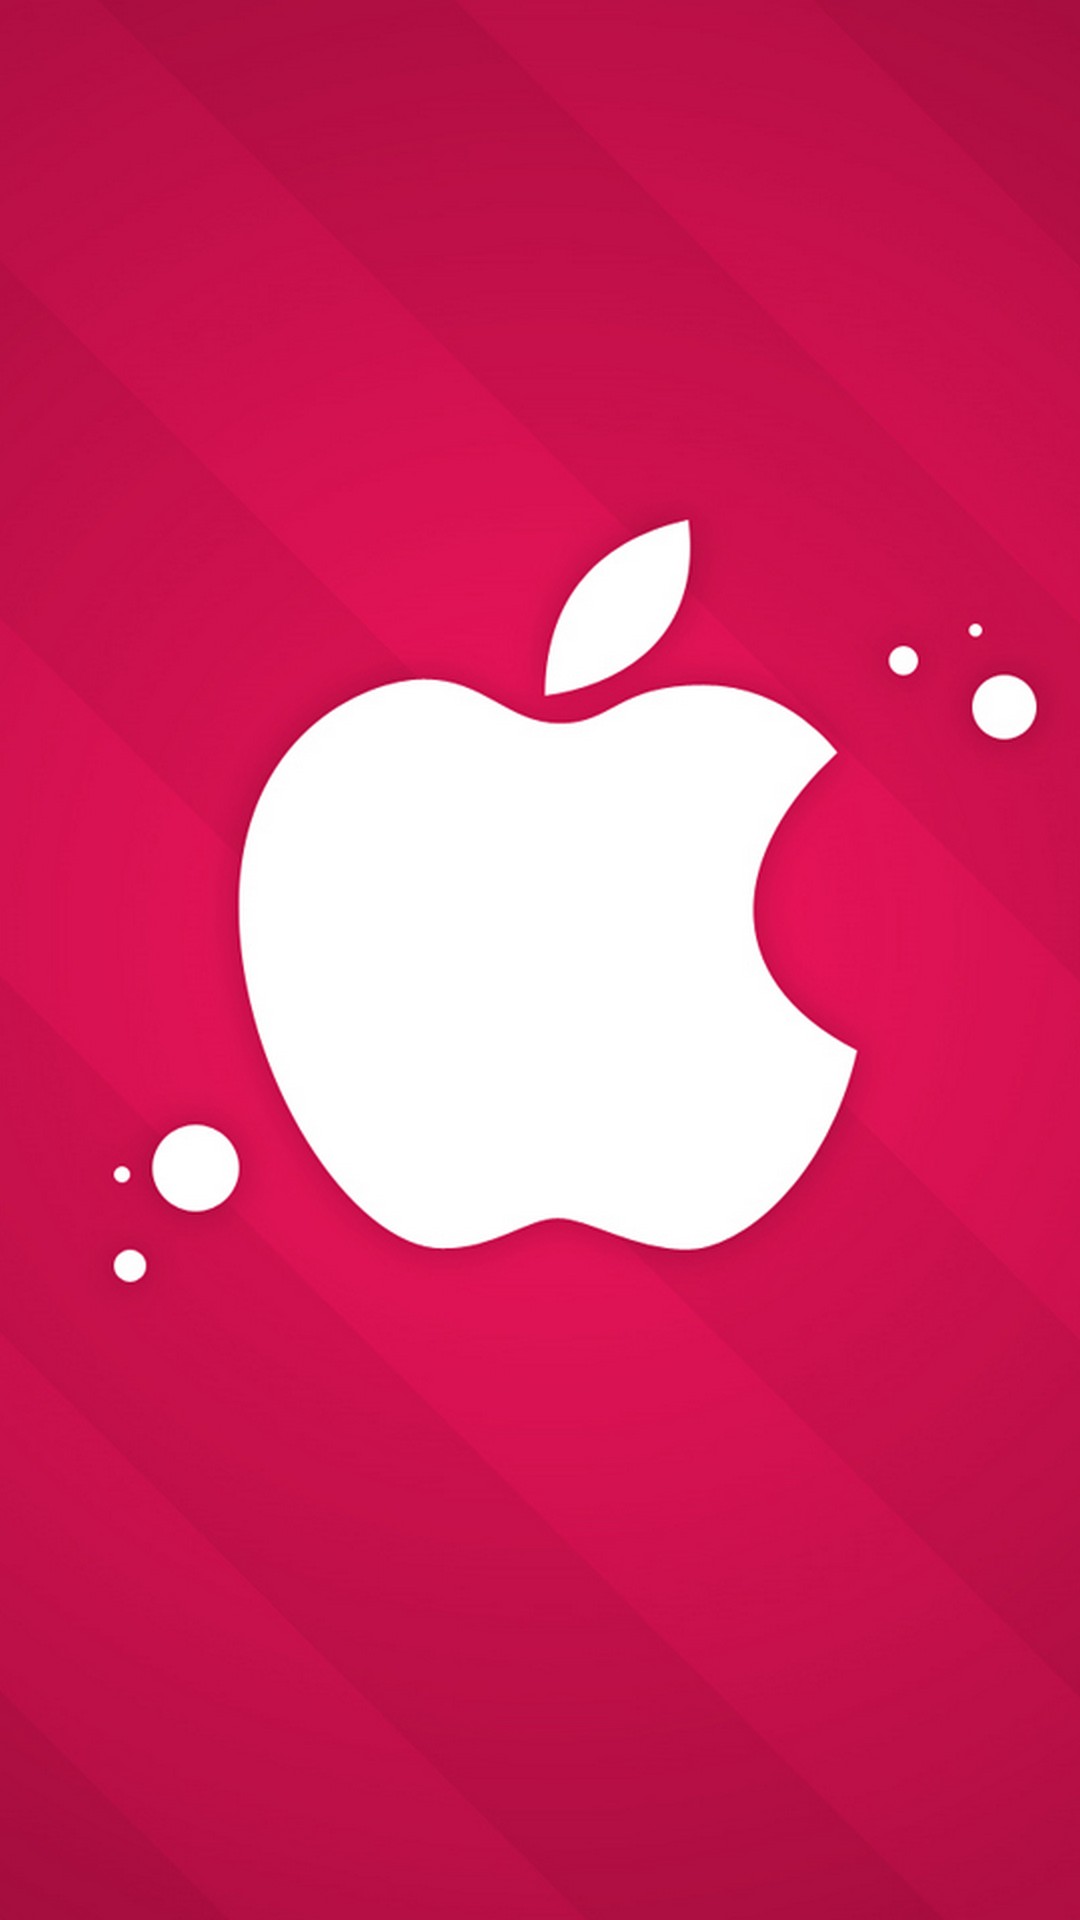 Apple Girly Wallpaper For Android Phones 1080x1920